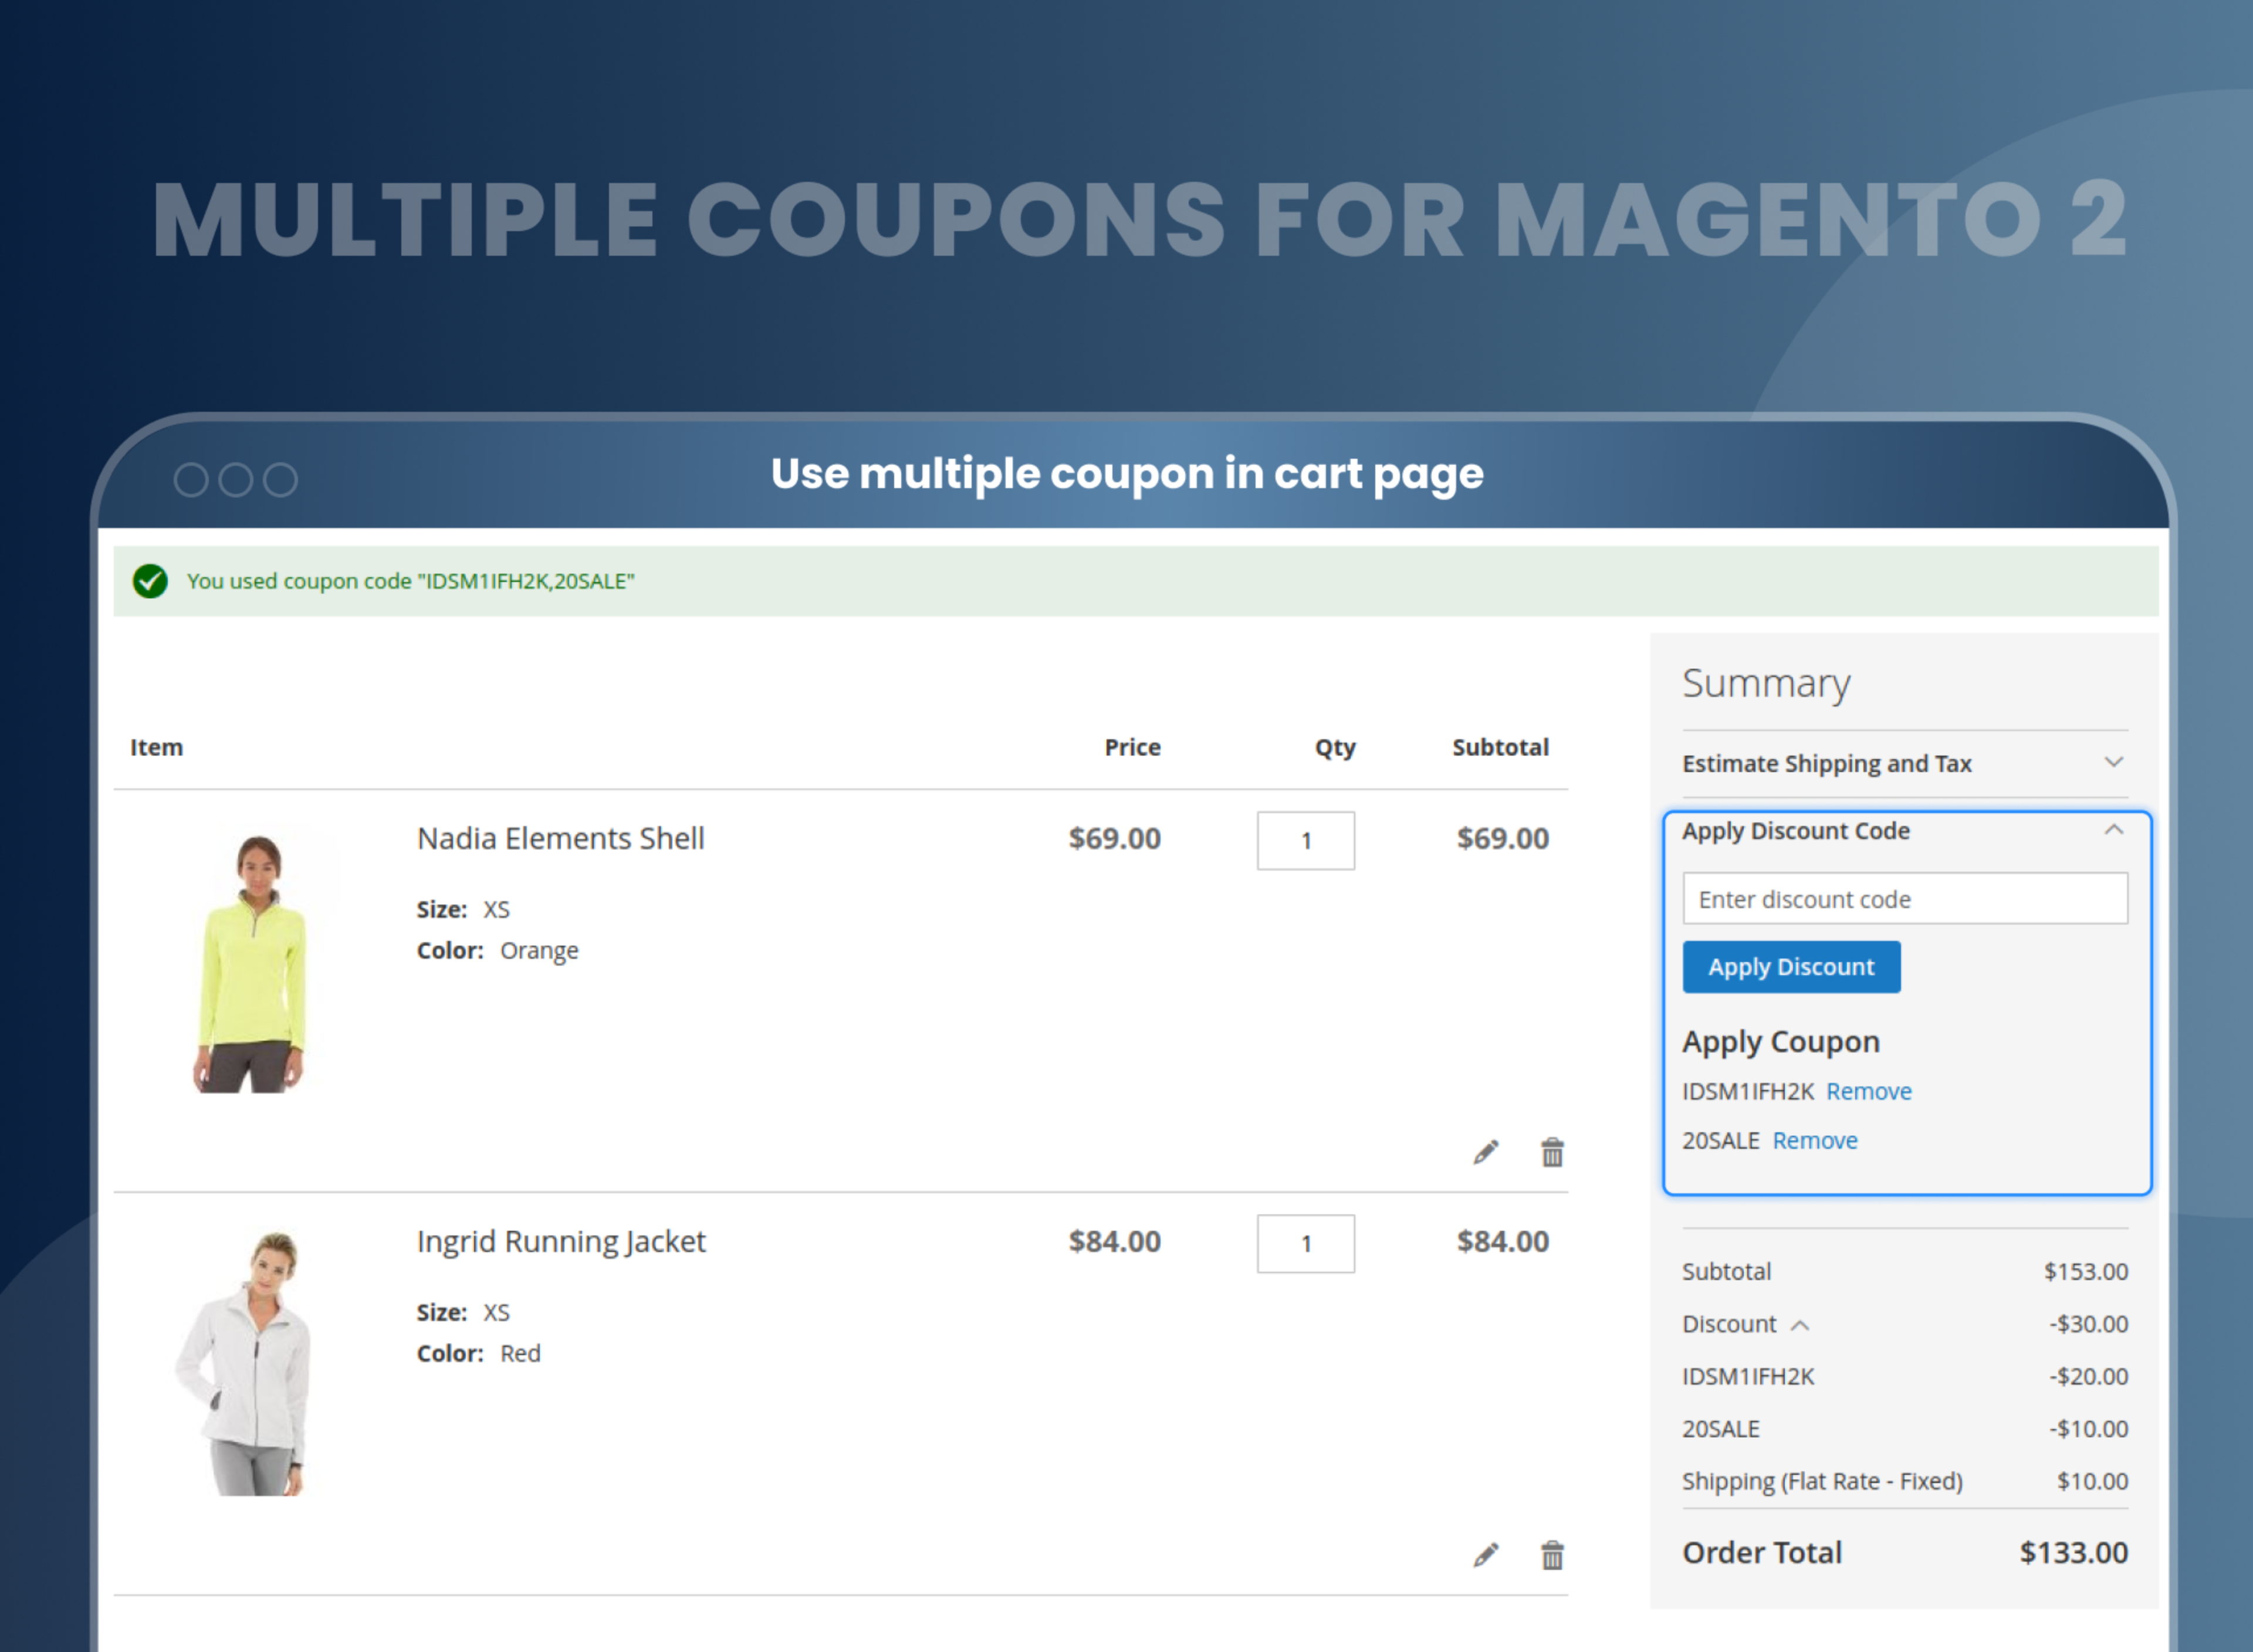 Use multiple coupon in cart page